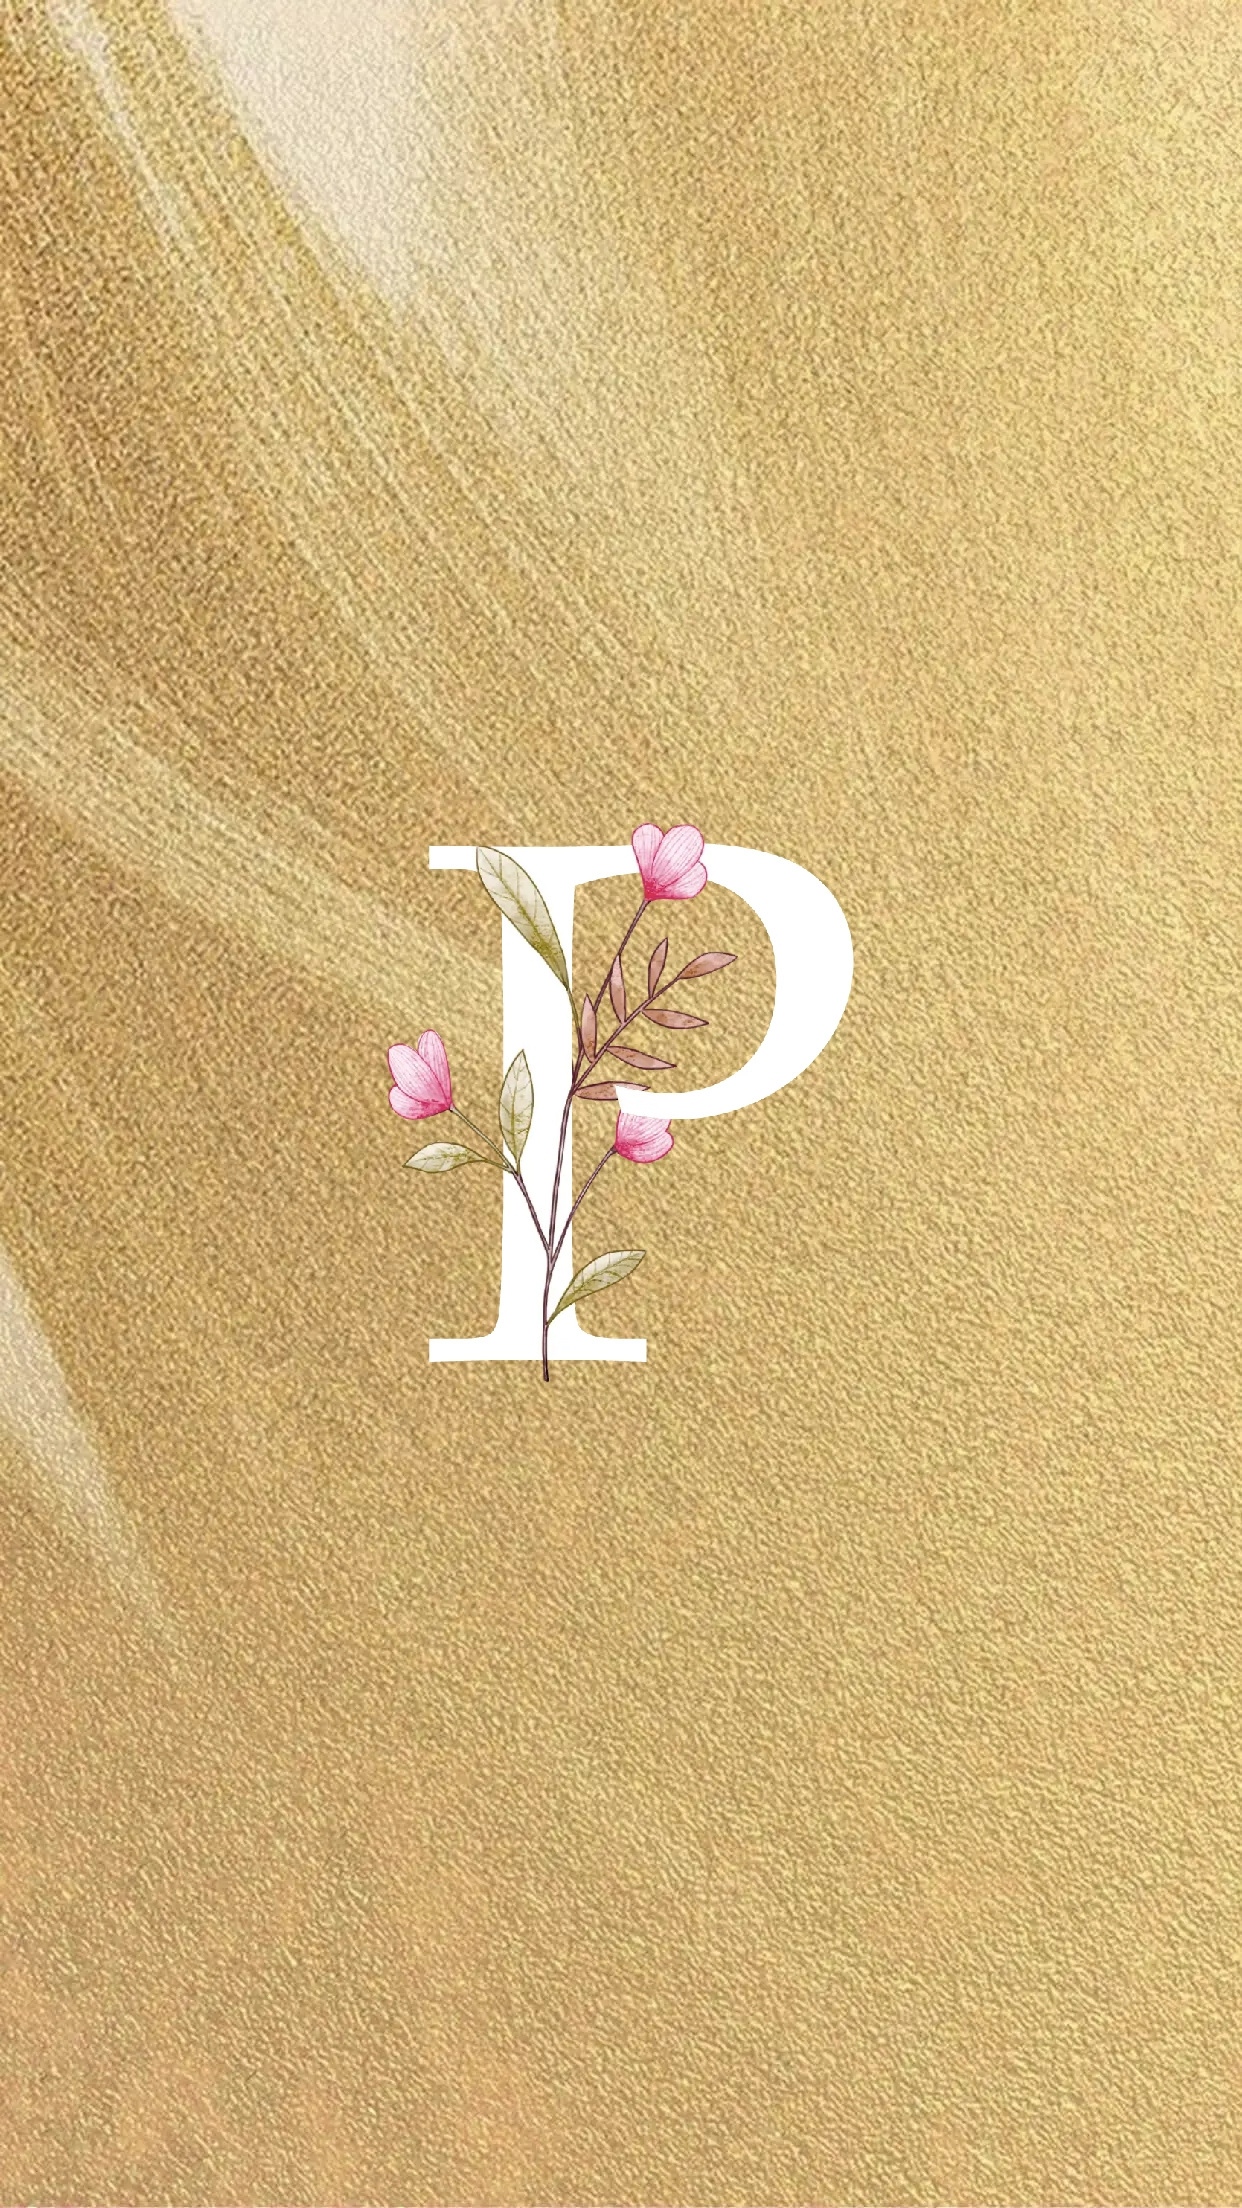 P Letter Design With PInk Flower